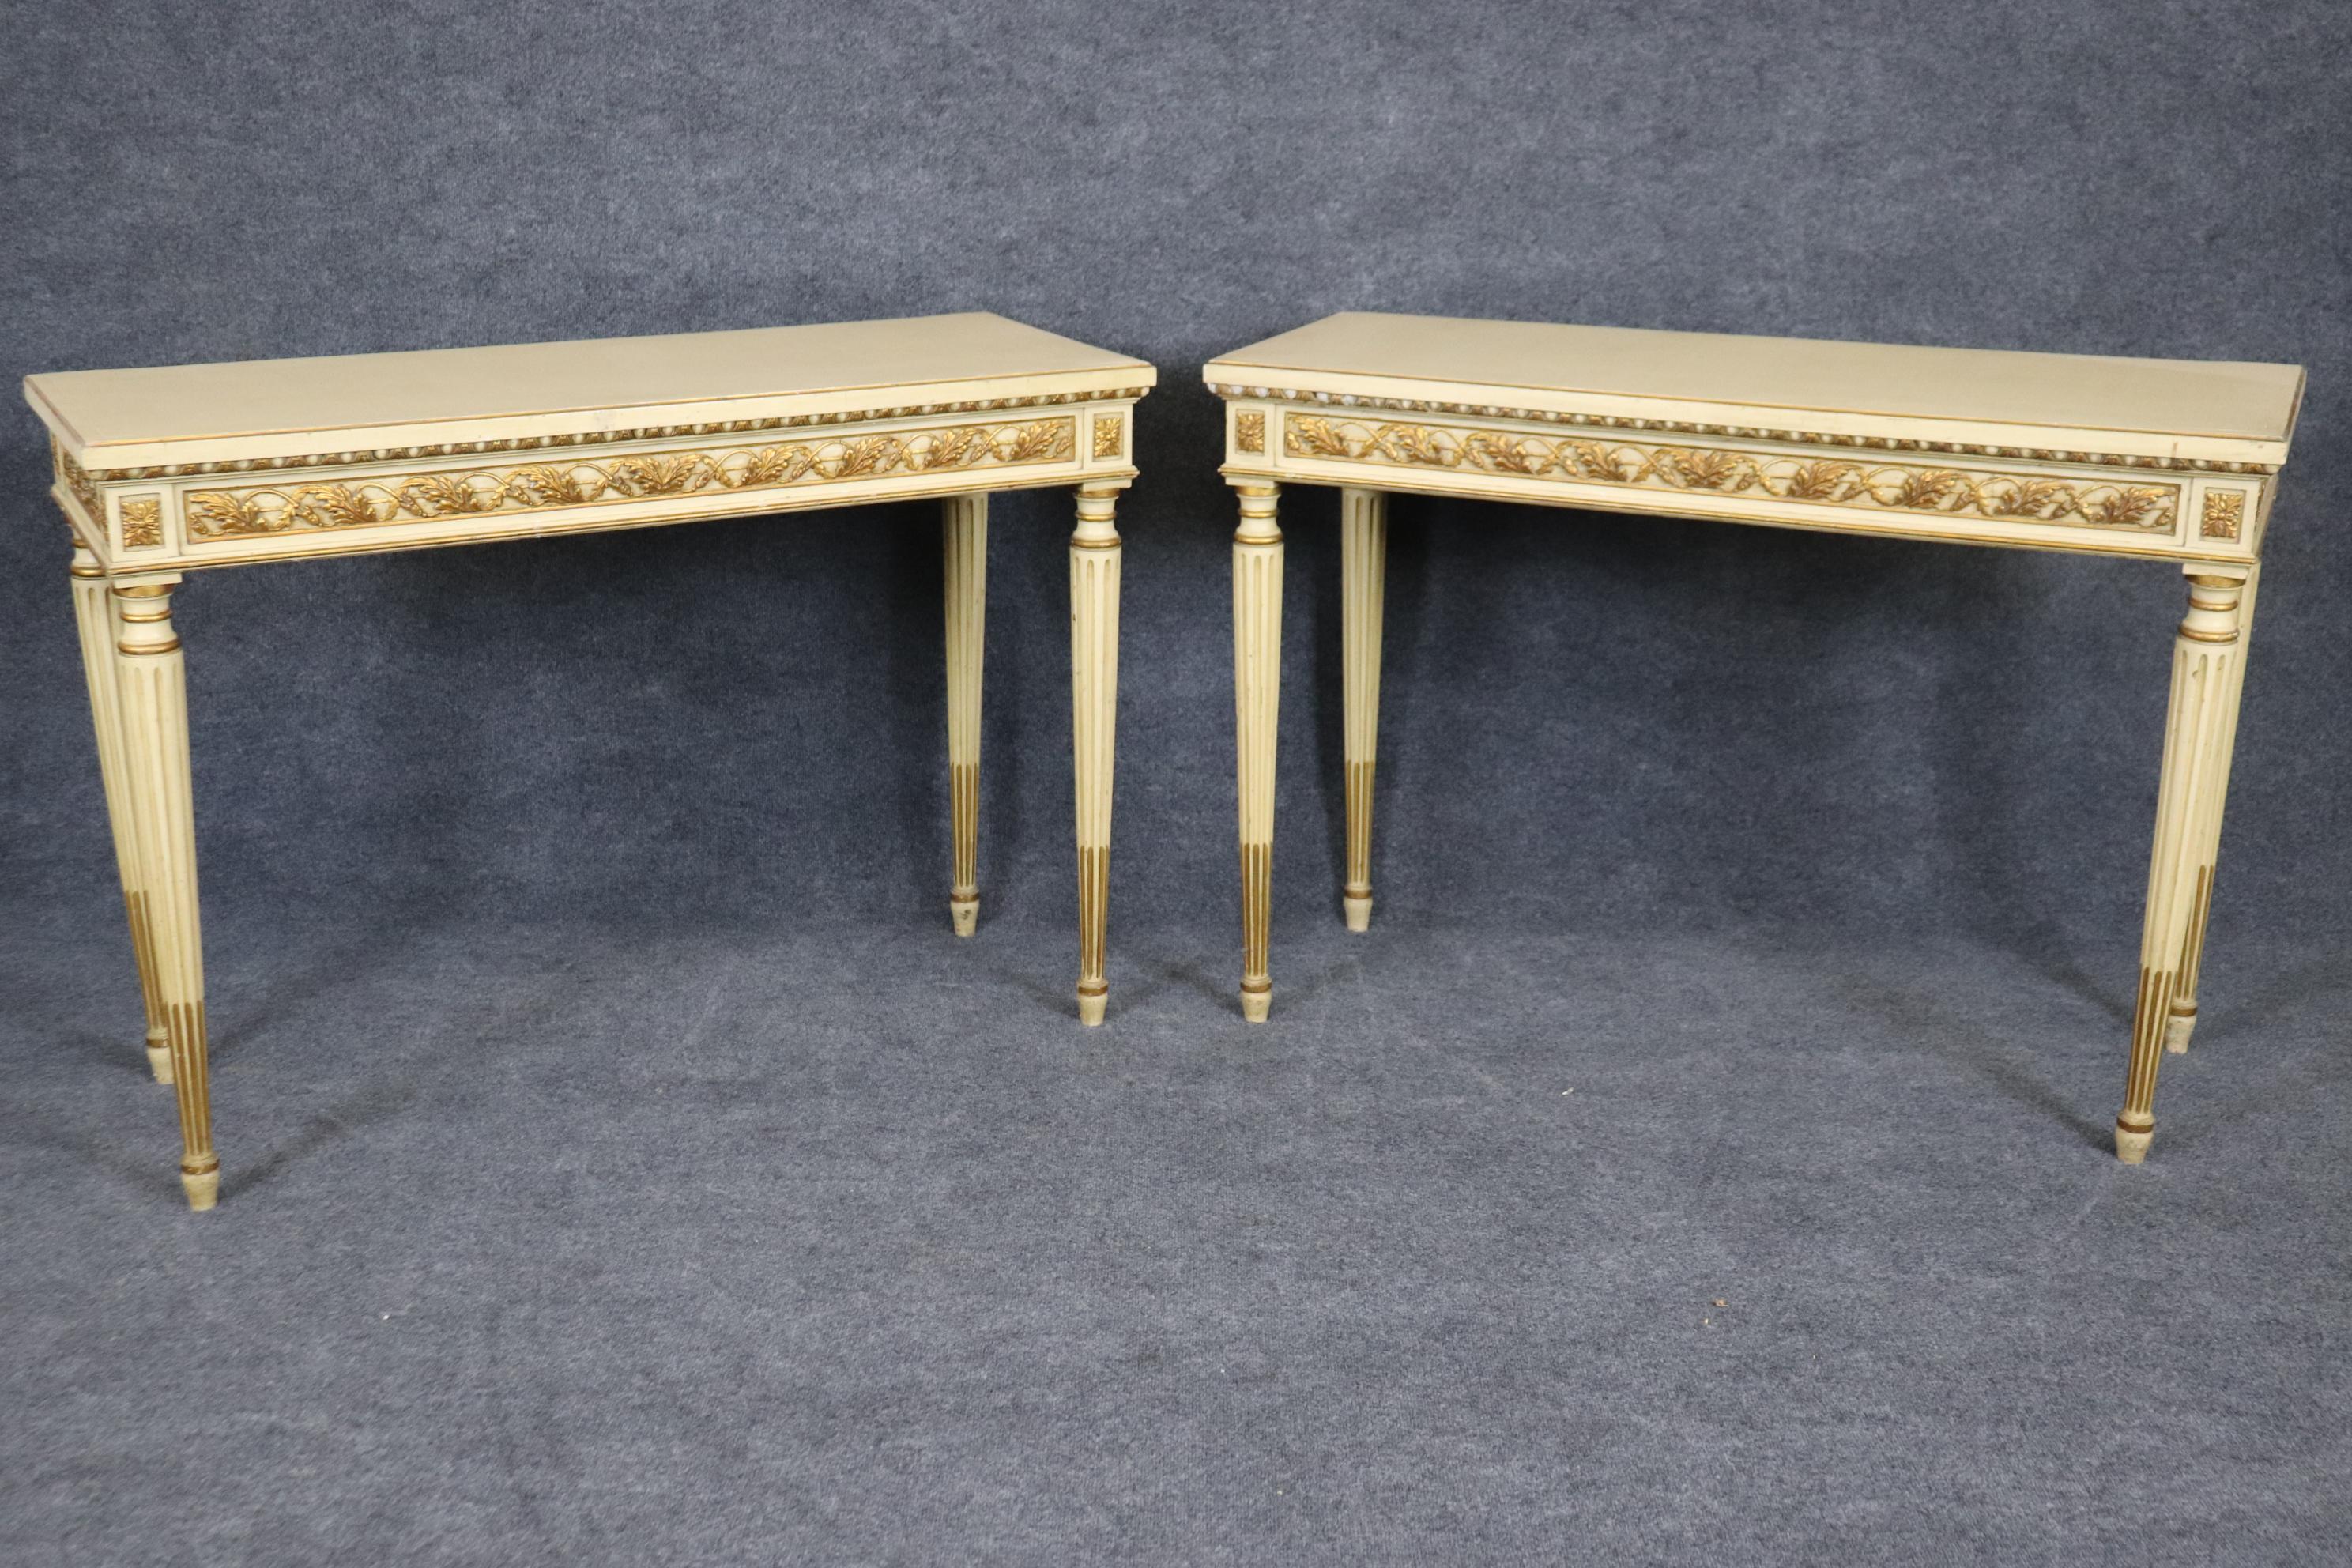 This is a beautiful pair of creme painted and gilded console tables with beautiful carved details like floral sprays and stop-fluted tapered legs. The tables are in good vintage condition and will shows signs of age such as minor chips in the